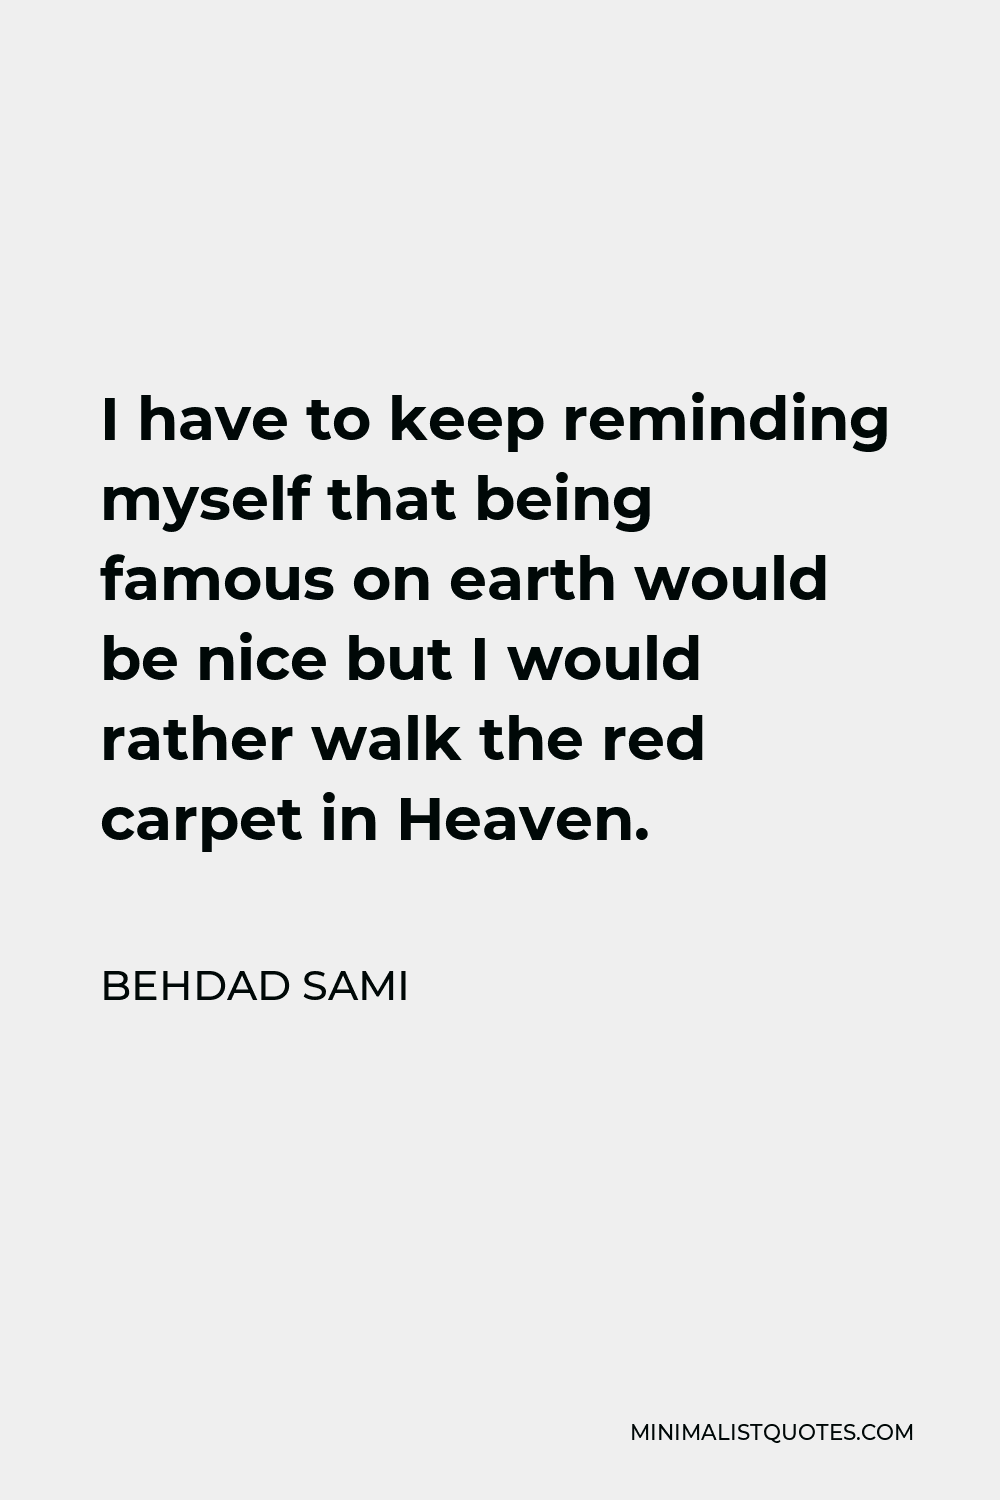 Behdad Sami Quote - I have to keep reminding myself that being famous on earth would be nice but I would rather walk the red carpet in Heaven.